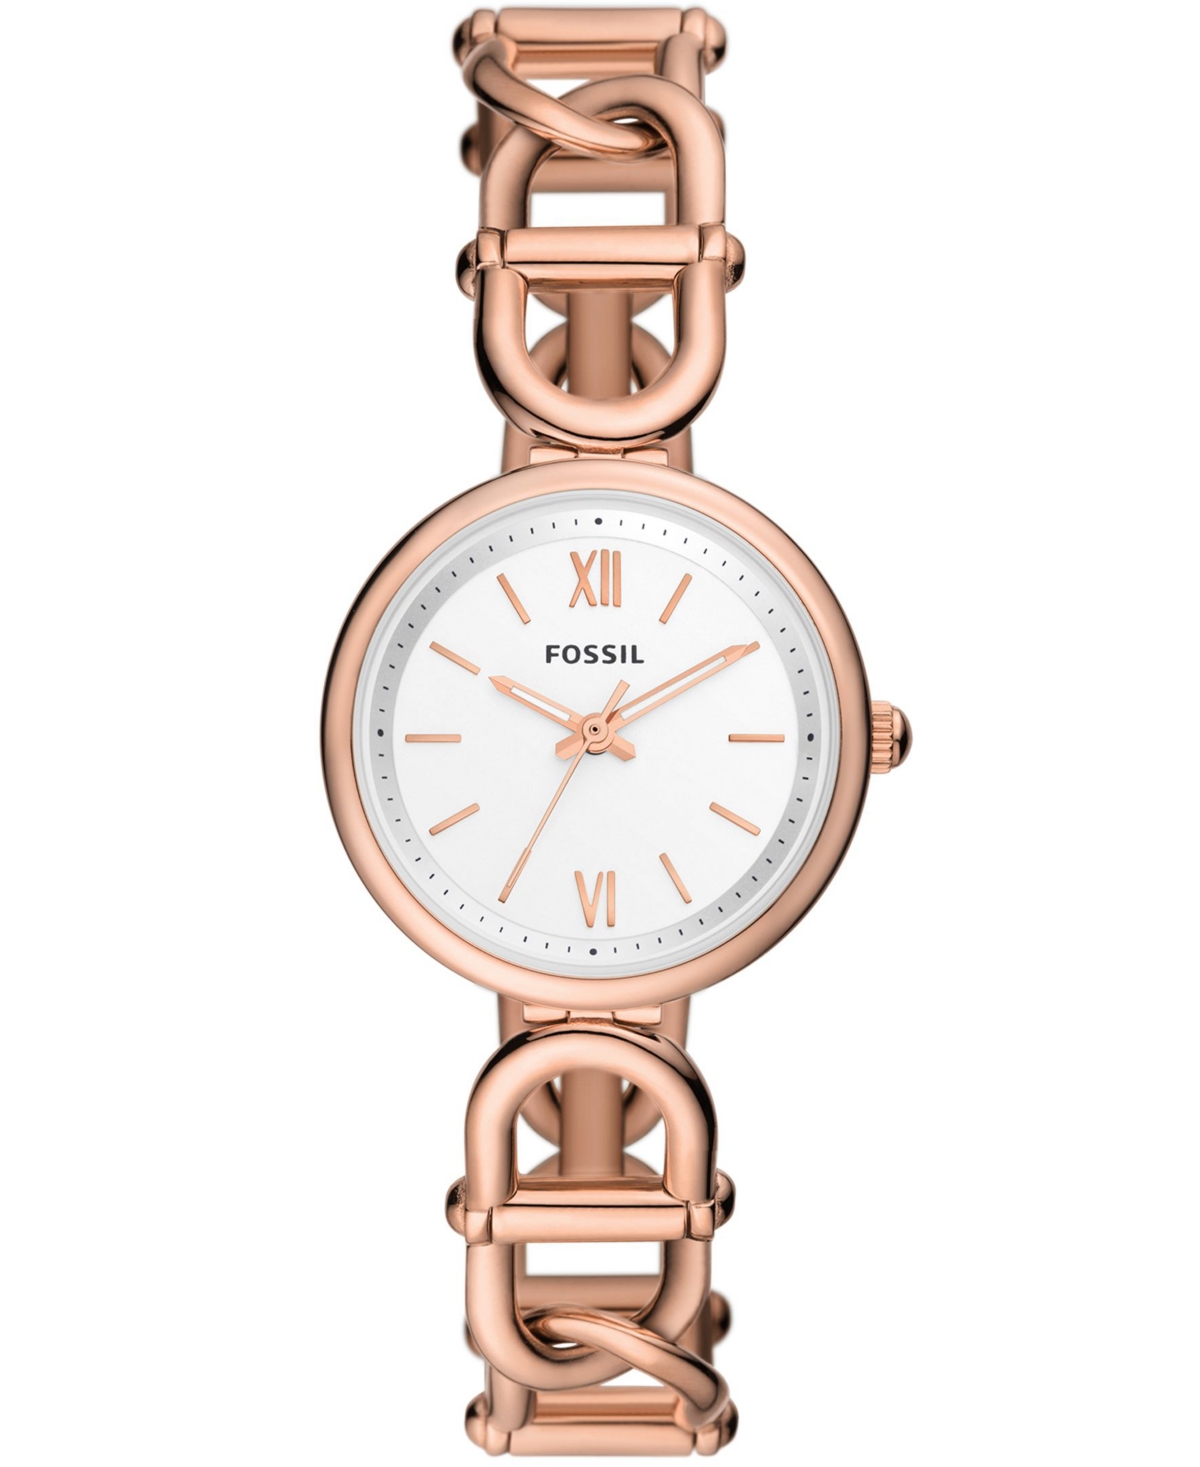 Fossil Women's Carlie Three-hand Rose Gold-tone Stainless Steel Watch, 30mm In White/rose Gold